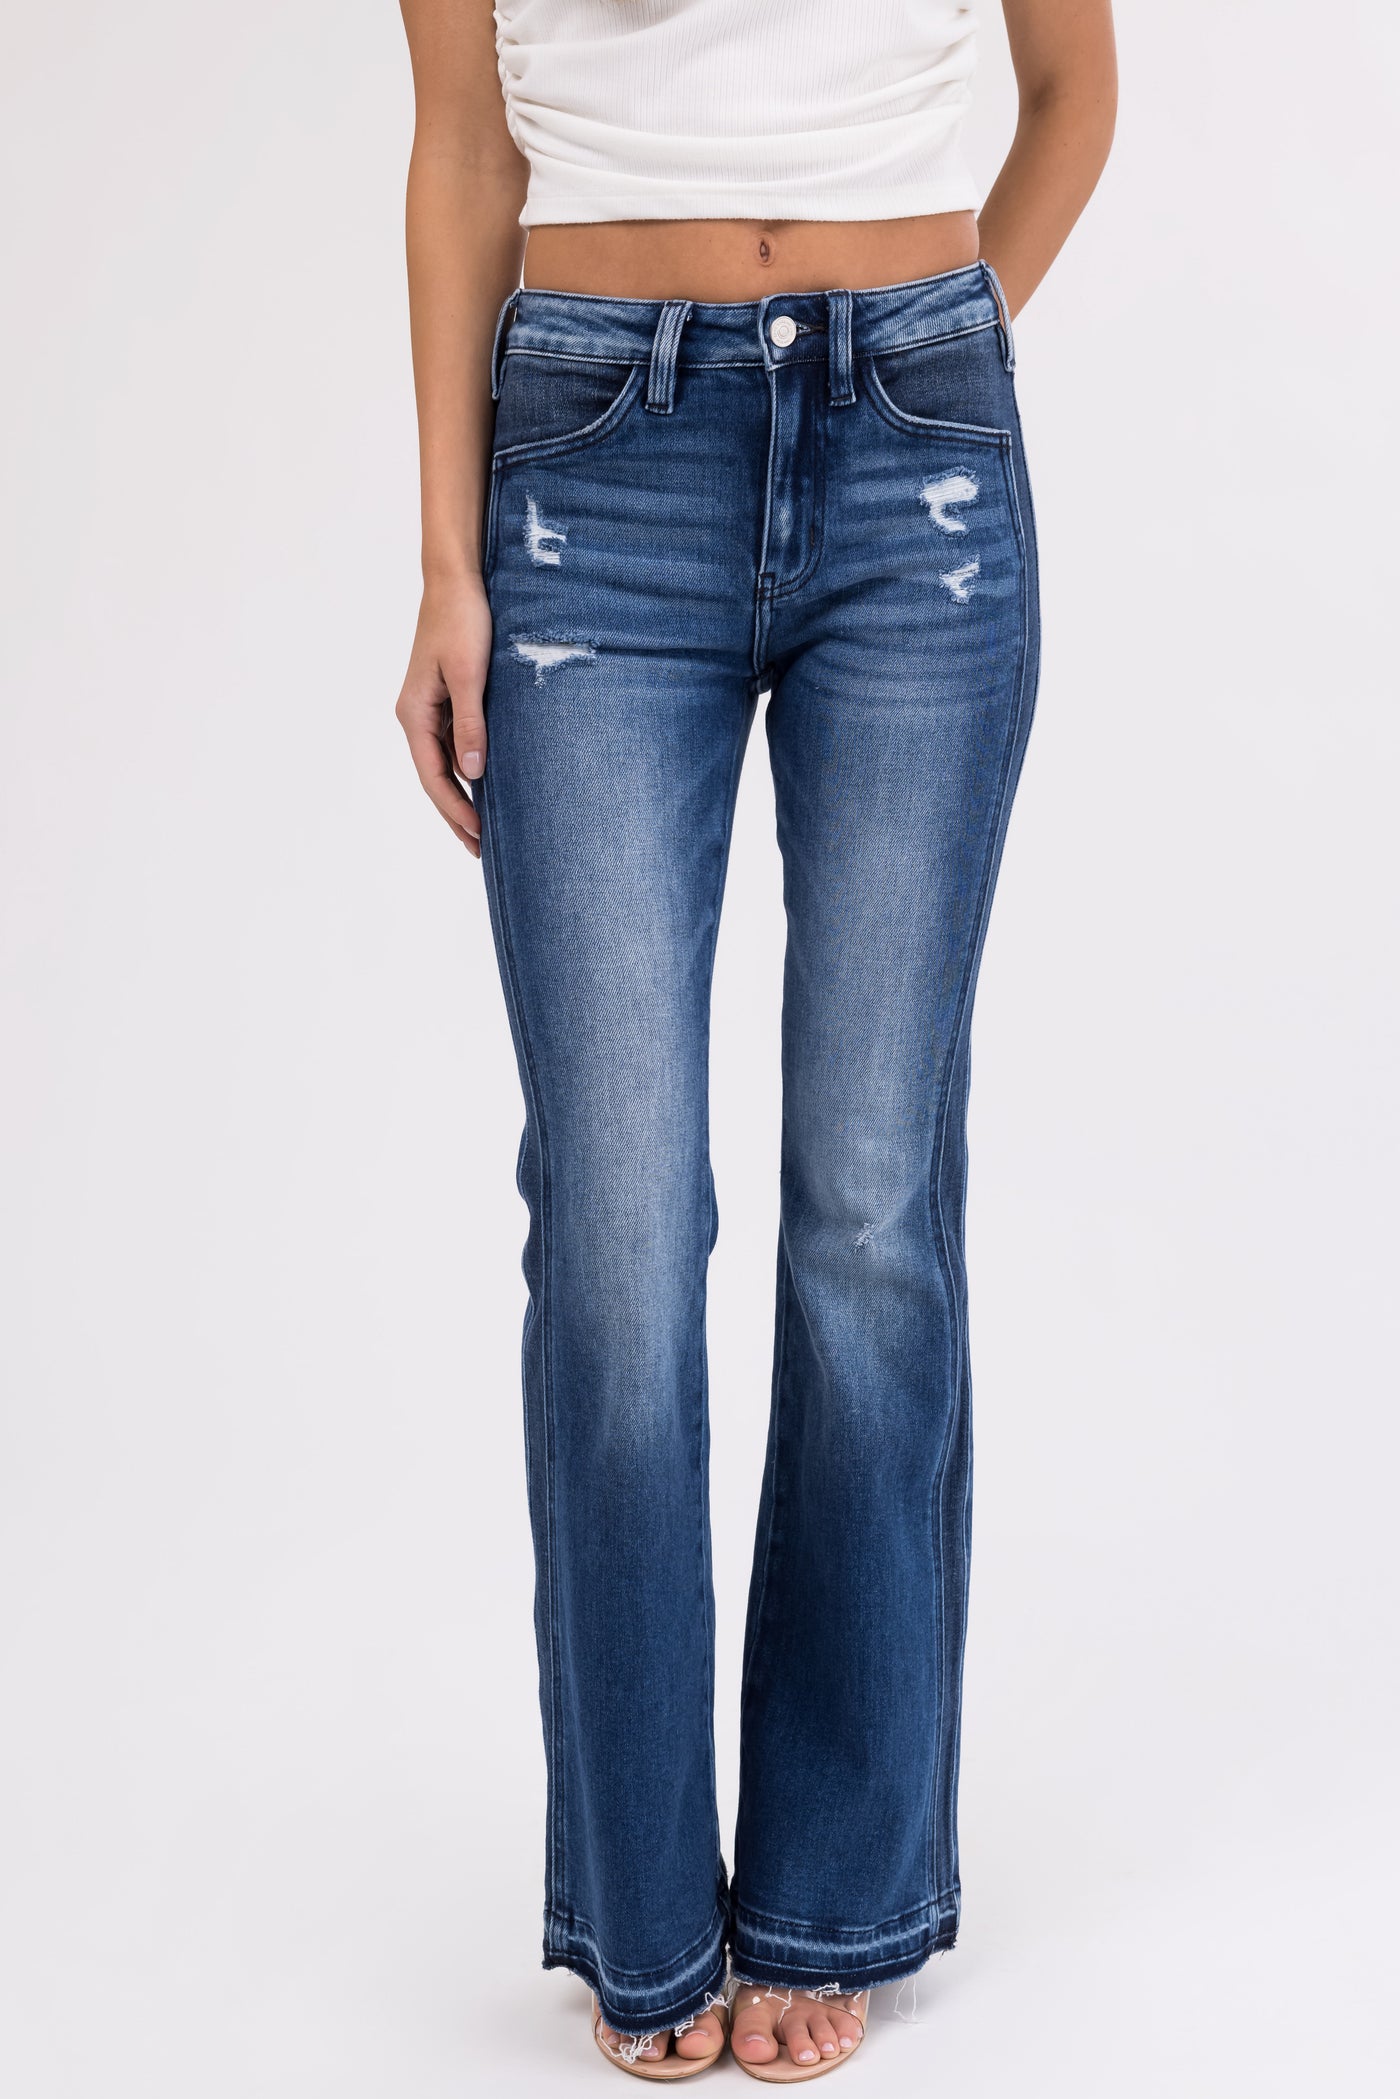 KanCan Dark Washed Double Seam Flare Jeans